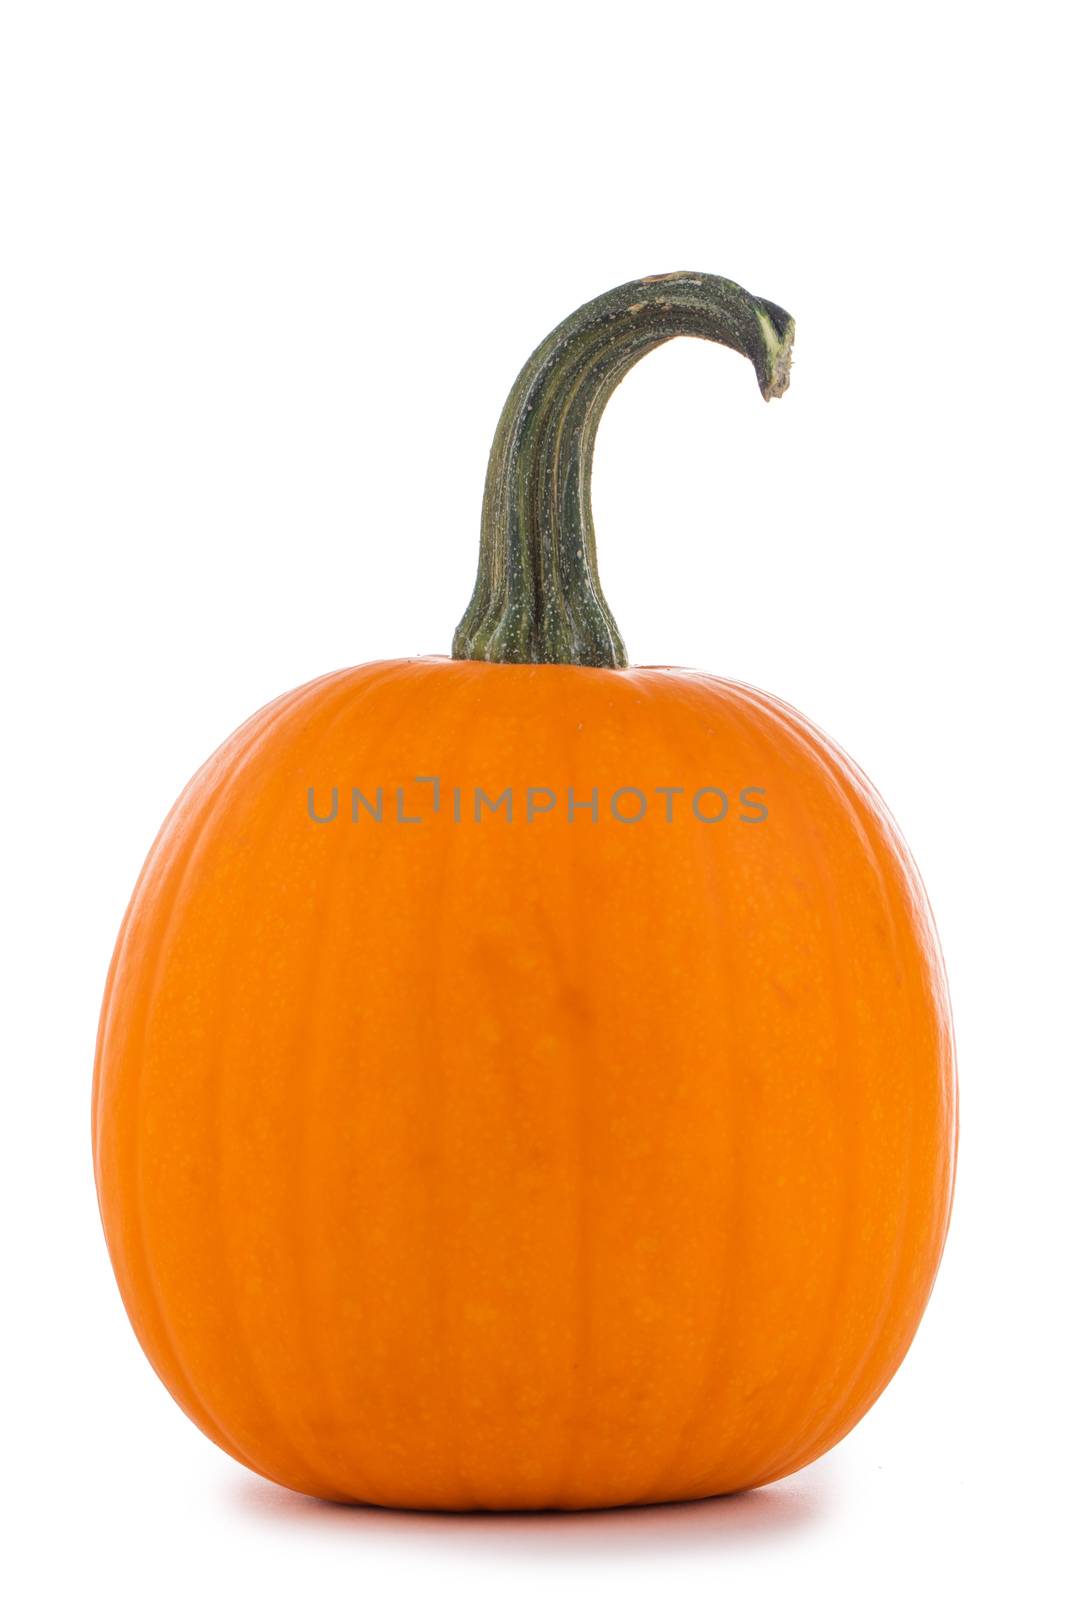 One perfect orange pumpkin isolated on white background for Halloween carving